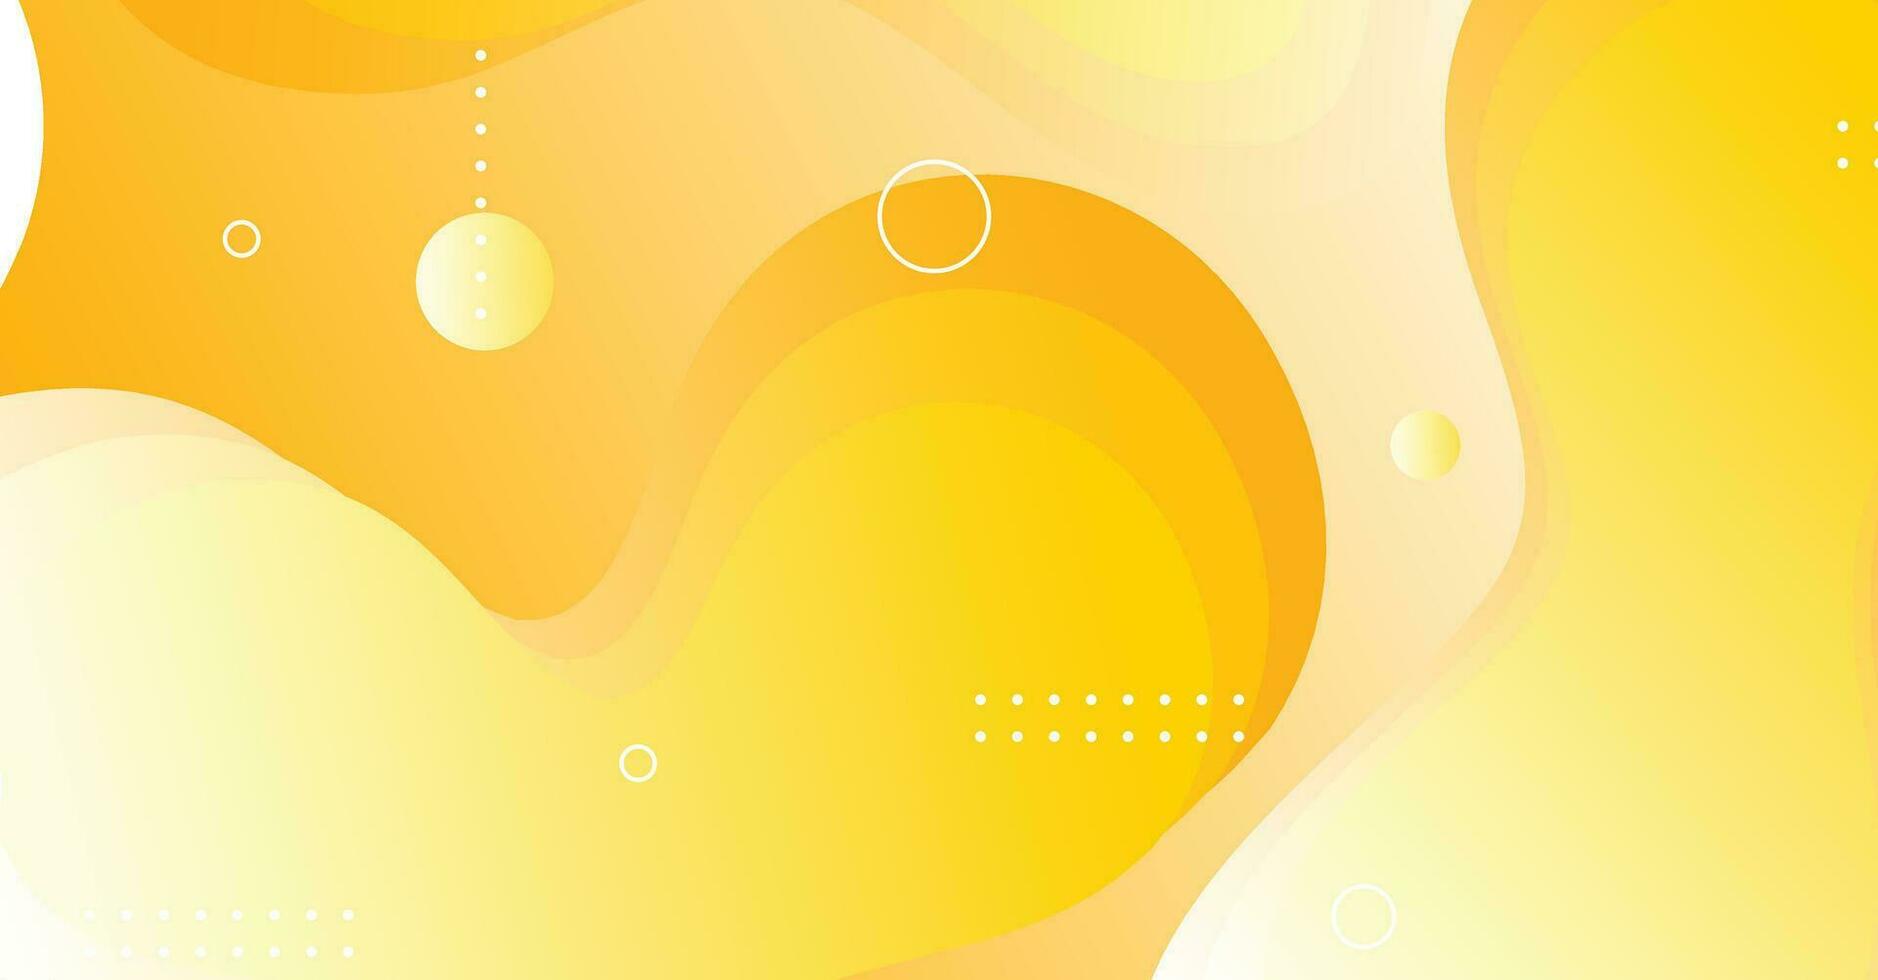 Abstract liquid wave background with yellow and white gradient color background vector